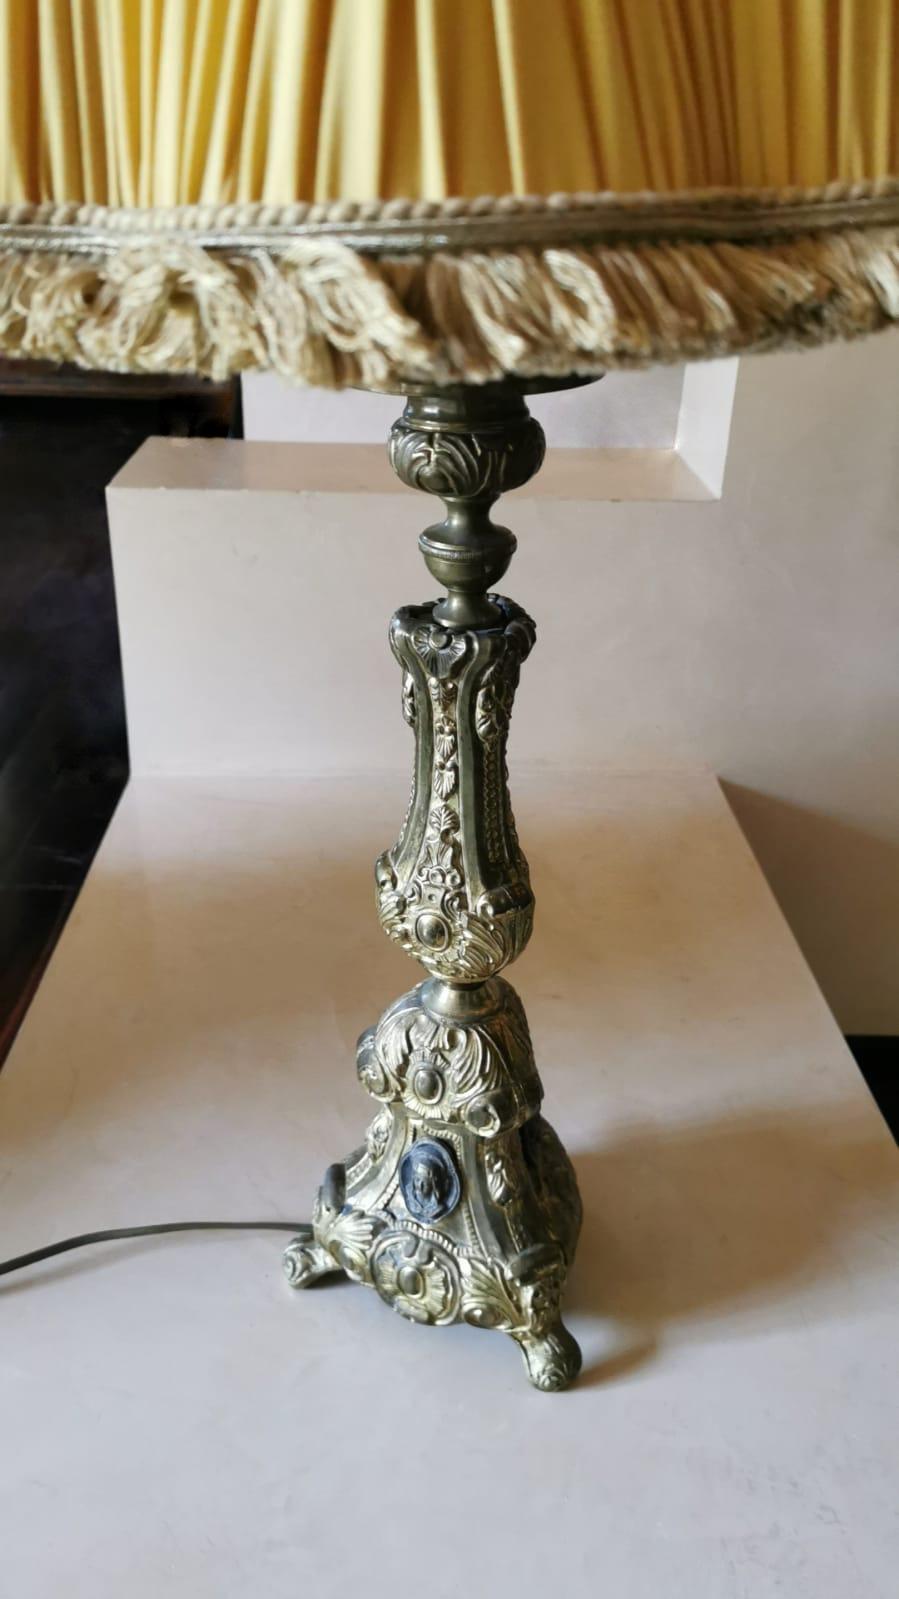 Rococo Revival Rococo Style French Table Lamp in Chiseled Brass and Pongé Fabric Lampshade